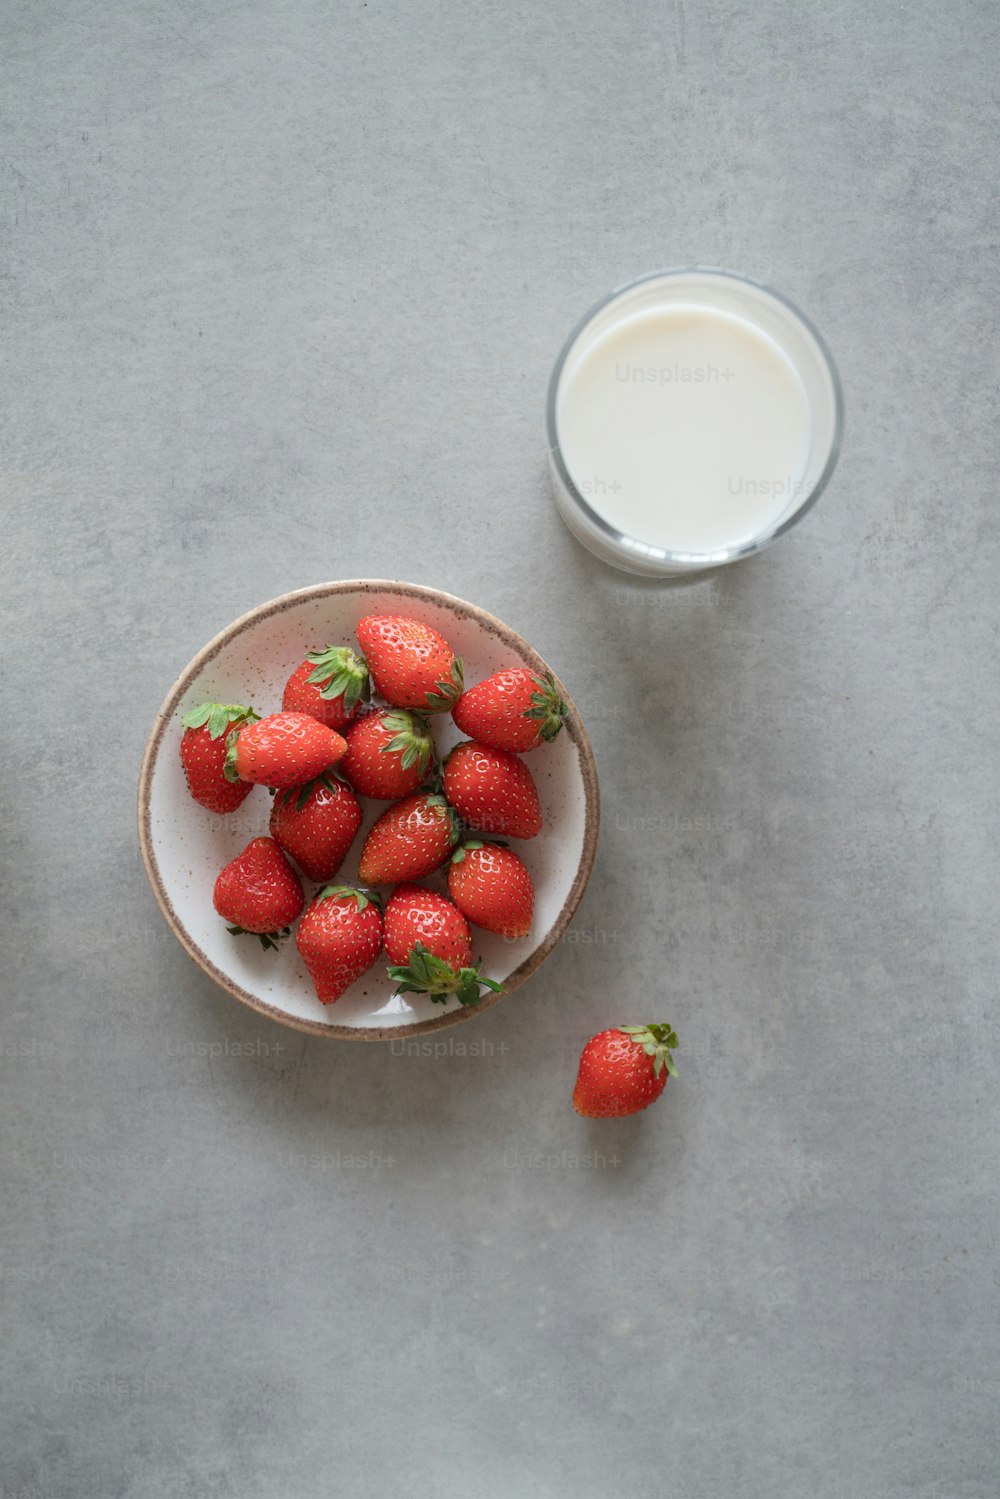 a bowl of strawberries next to a glass of milk